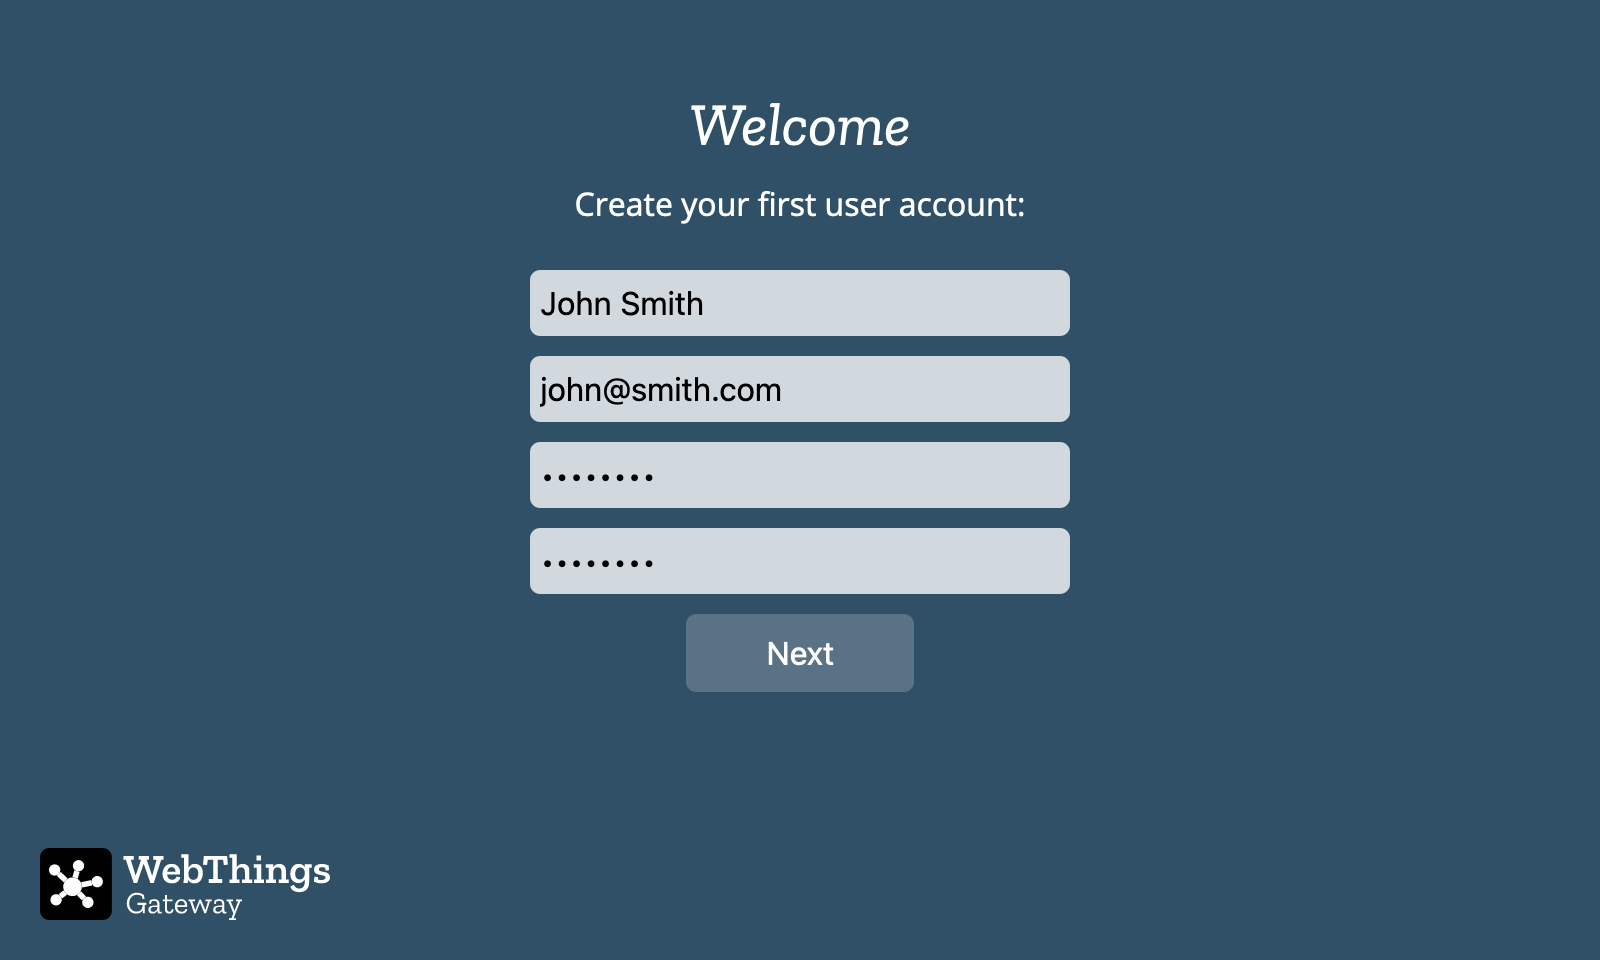 A screenshot showing a form to enter a name, email address and password